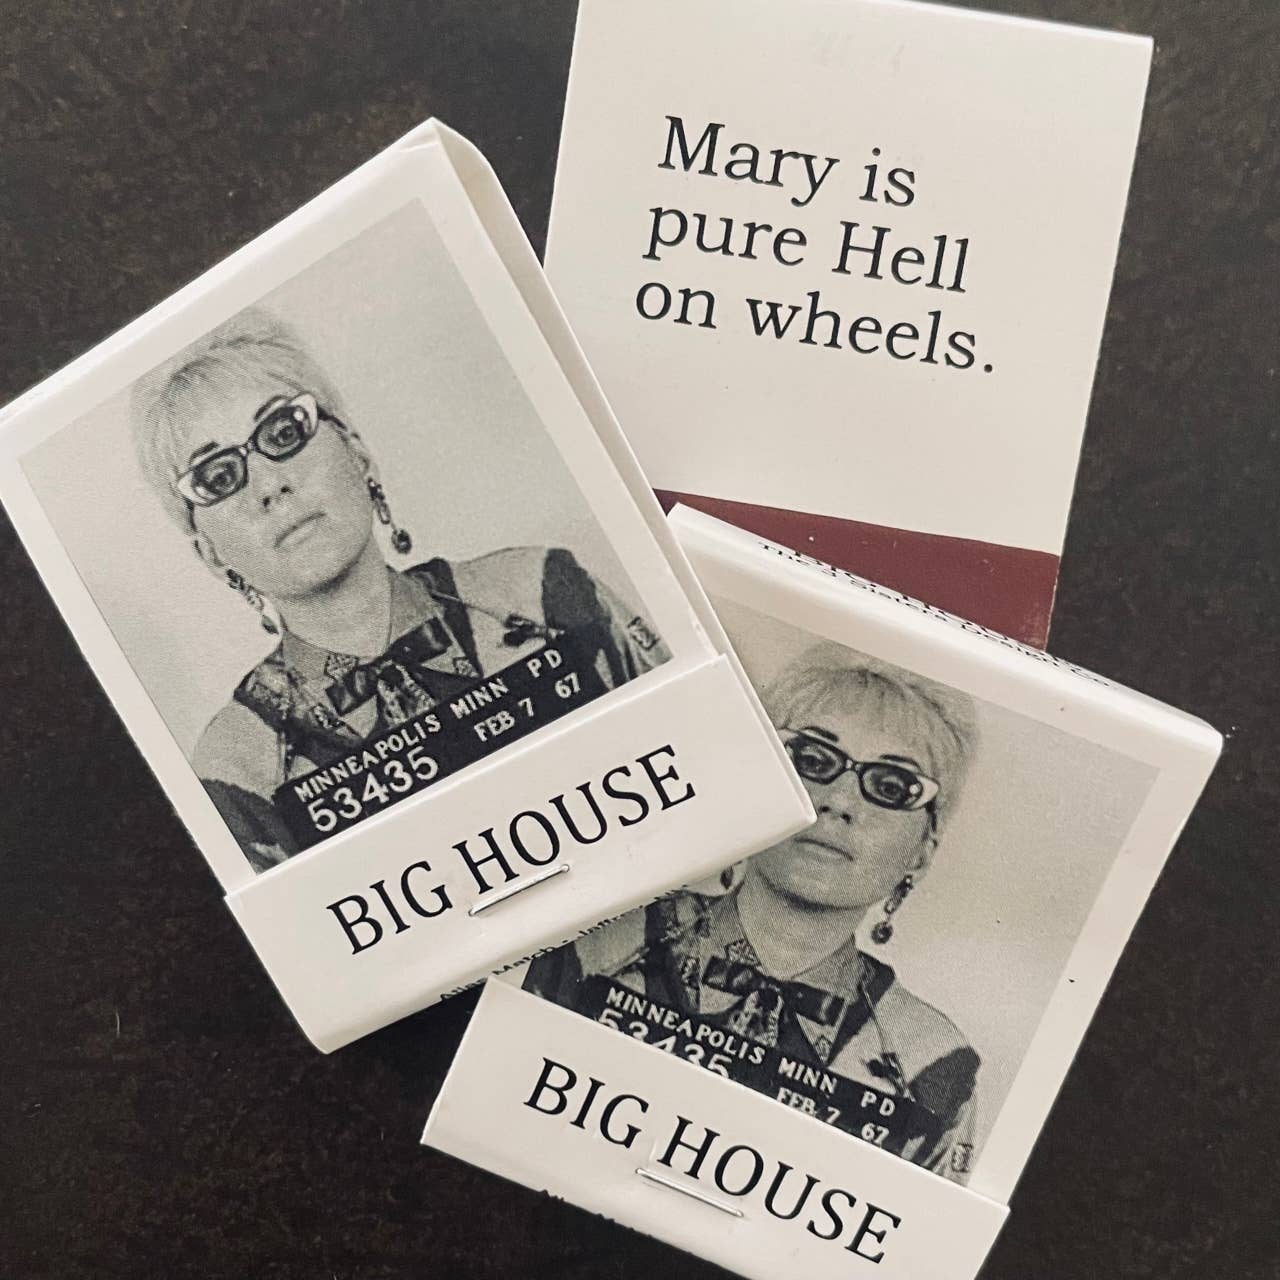 The 3 Sisters Design Co. - BIG House Matches, Mary is pure Hell on wheels.